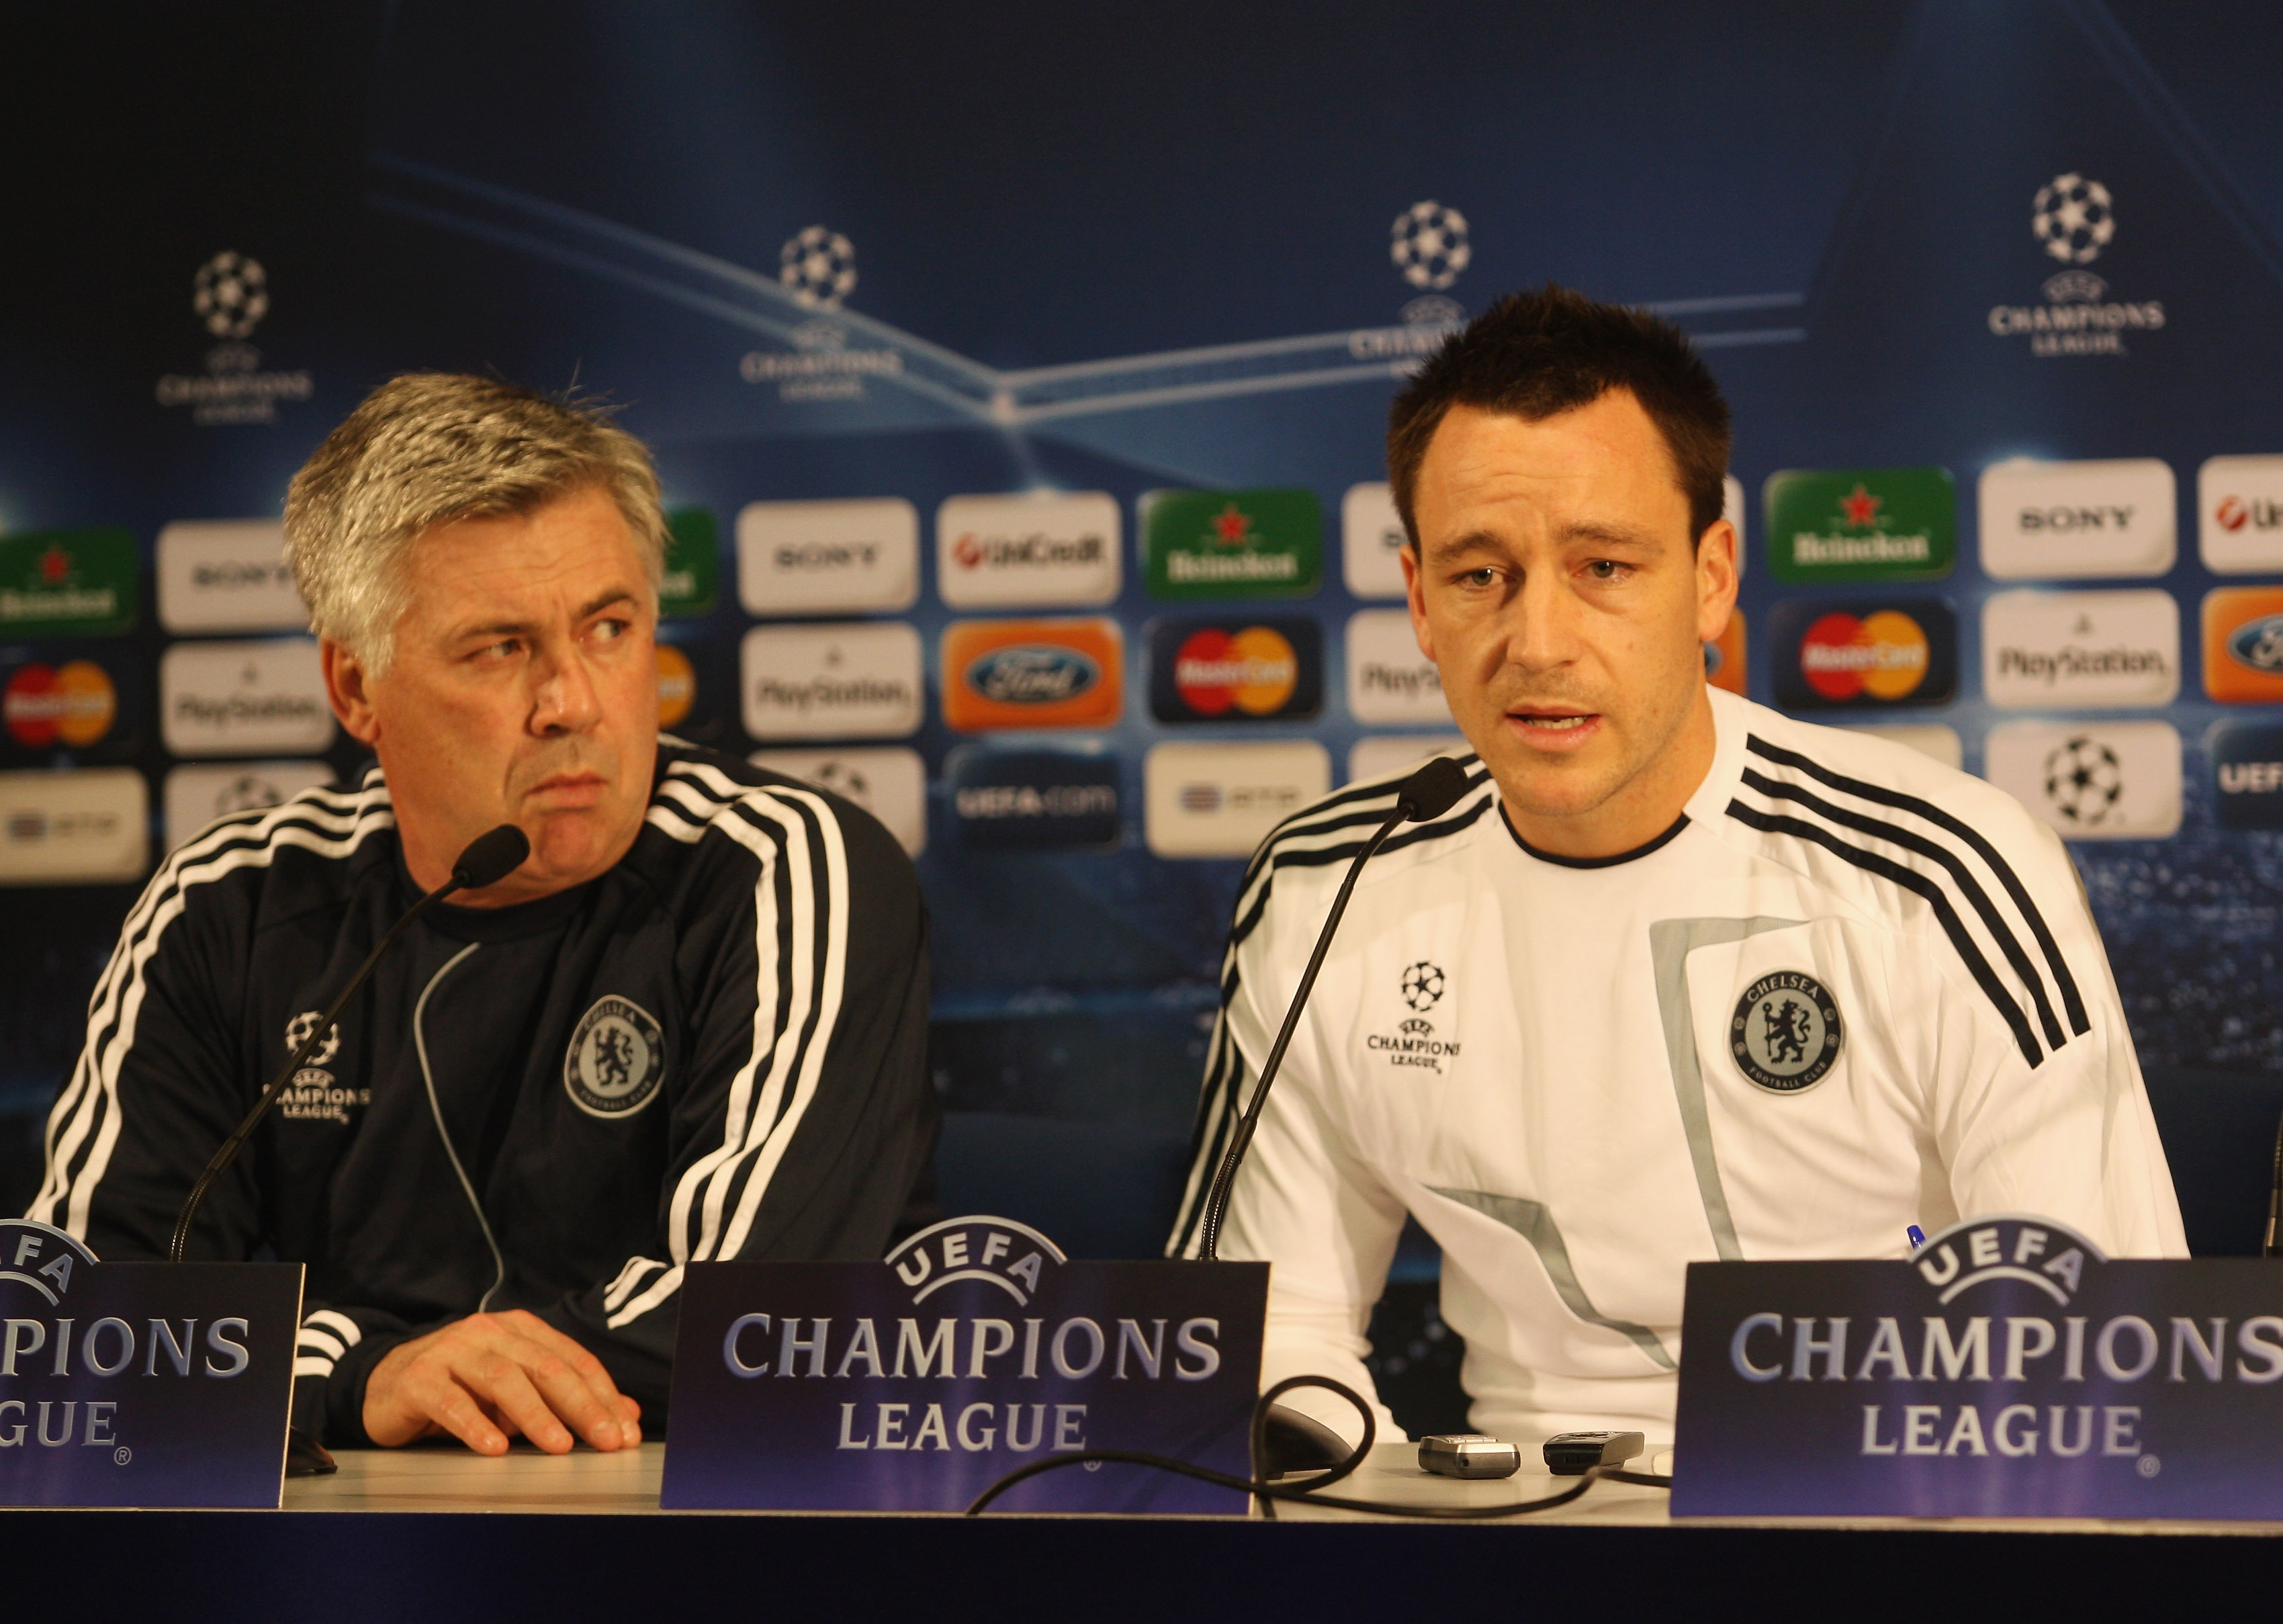 PORTO, PORTUGAL - NOVEMBER 24:  Captain John Terry speaks as manager Carlo Ancelotti looks on during the Chelsea press conference, prior to UEFA Champions League Group D match against FC Porto, at the Estadio Dragao on November 24, 2009 in Porto, Portugal